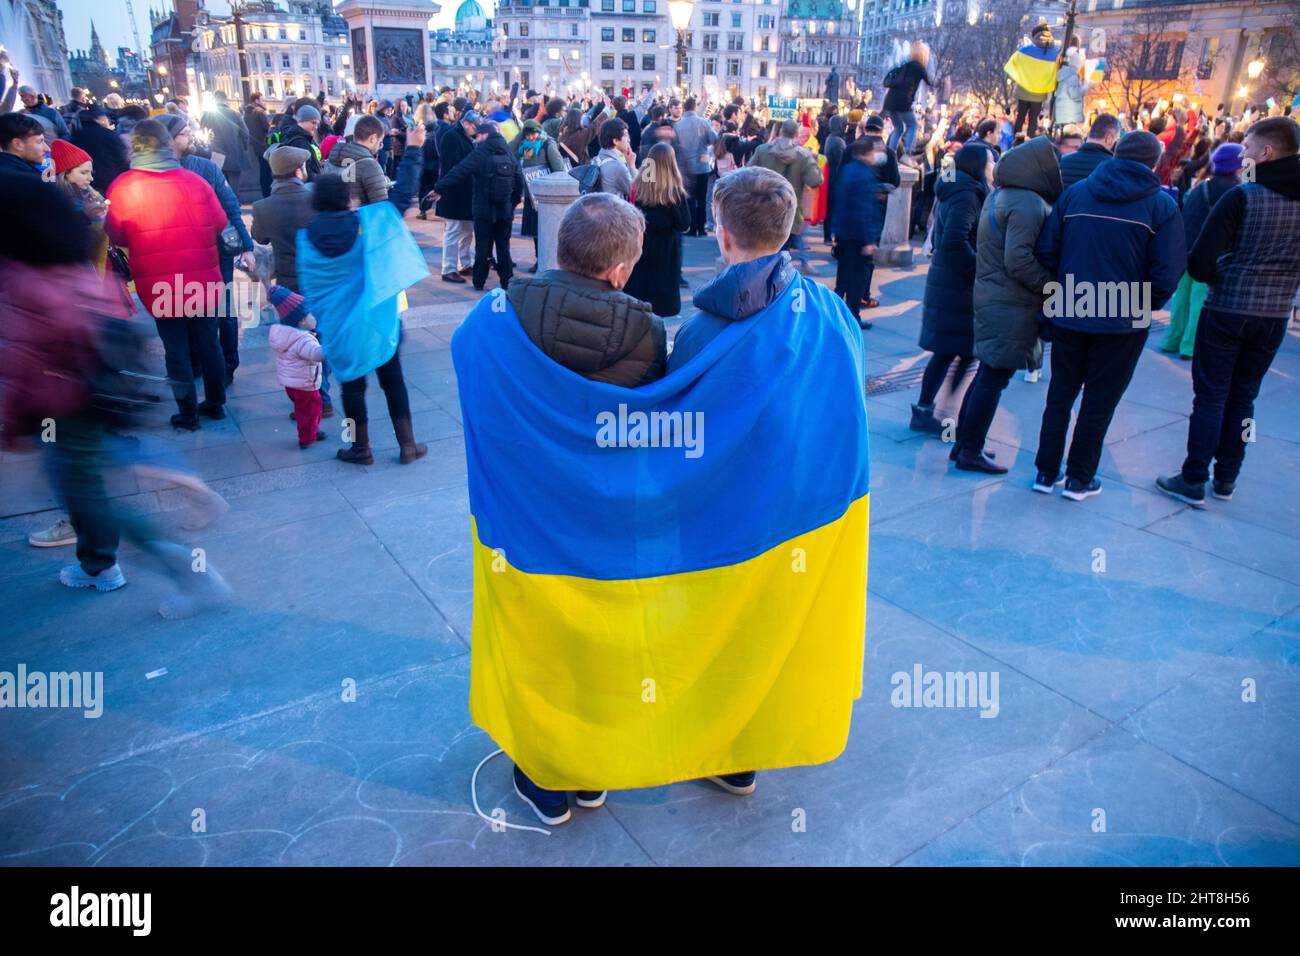 LONDON, FEBRUARY 27 2022 Two men draped in the ukrainian flag watch as Pro-Ukraine demonstrators hold protest against Russia's invasiom of the Ukraine on Trafalgar Square. Credit: Lucy North/Alamy Live News Stock Photo